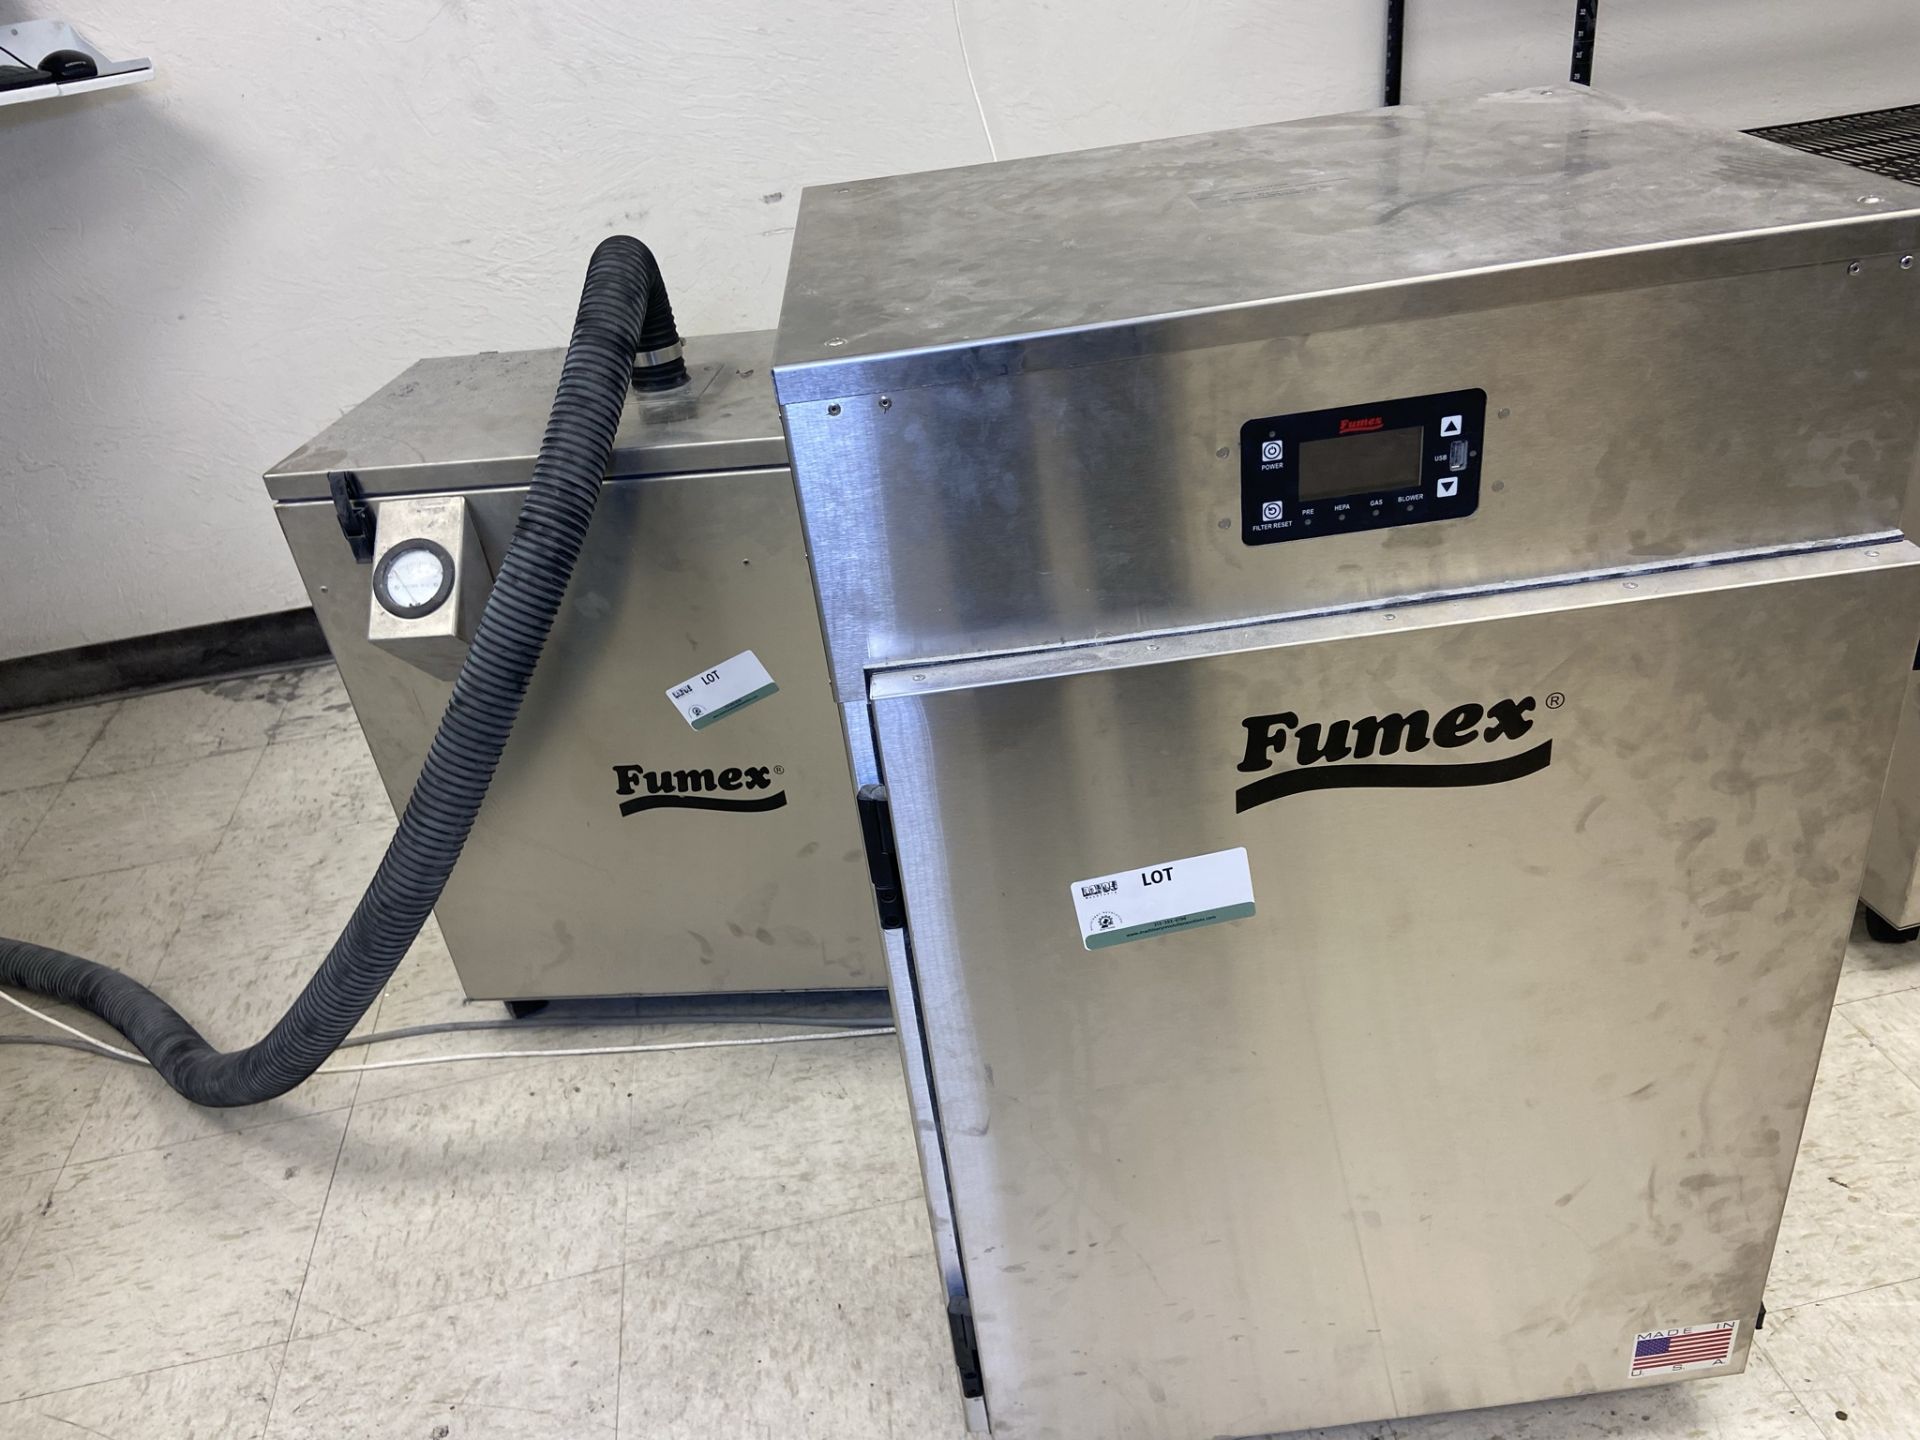 Fumex FA5-1 Fume Extractor for Laser